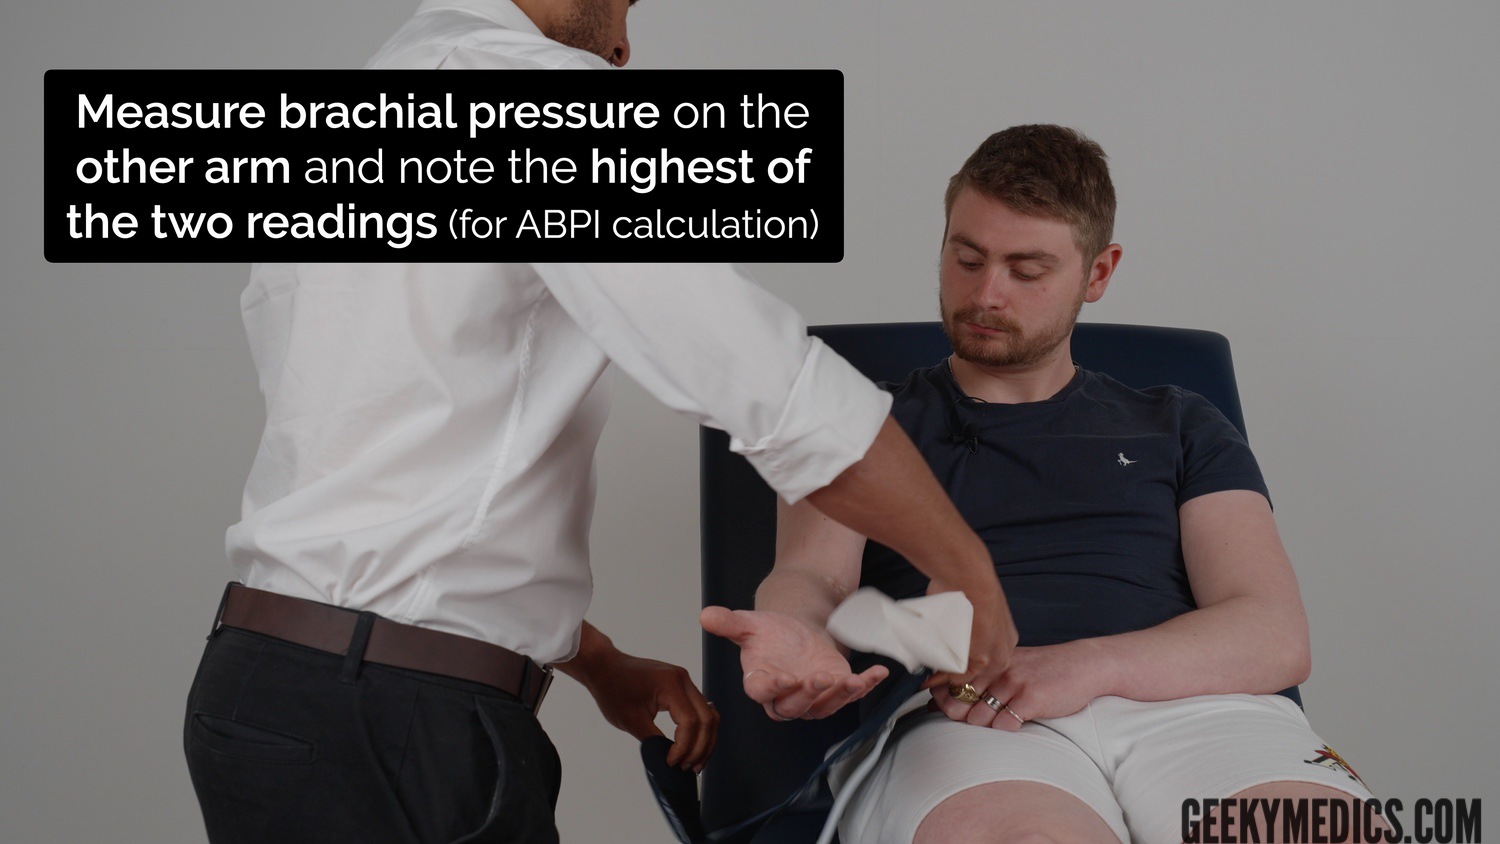 Now repeat on the other brachial artery to assess systolic pressure. Record the higher of the two systolic readings for use when calculating ABPI